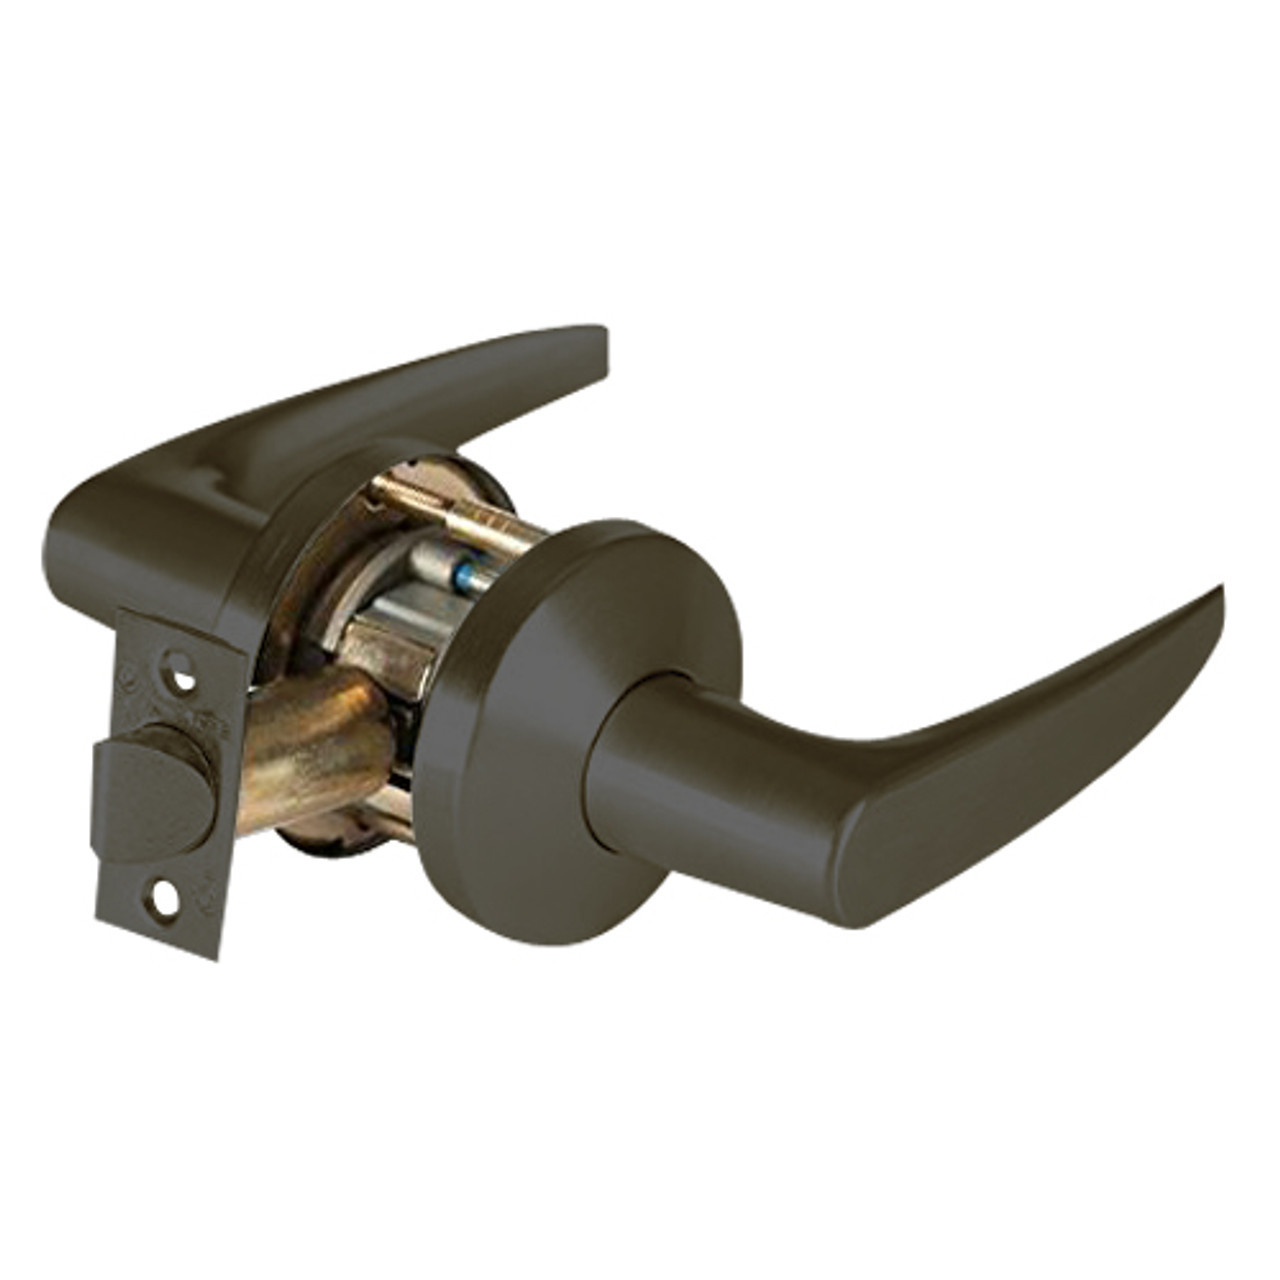 9K30NX16KSTK613LM Best 9K Series Passage Heavy Duty Cylindrical Lever Locks with Curved Without Return Lever Design in Oil Rubbed Bronze